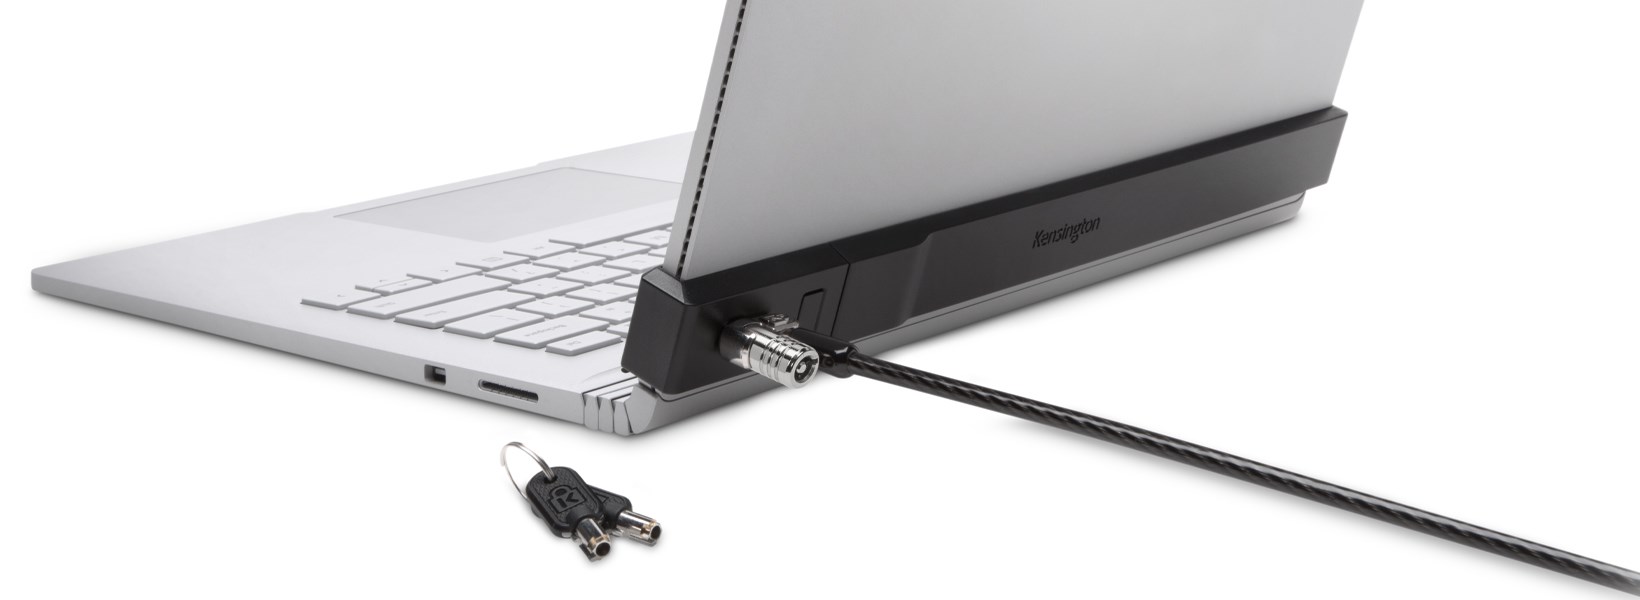 Laptop Lock and Slot Types: The Complete Buying Guide | Kensington